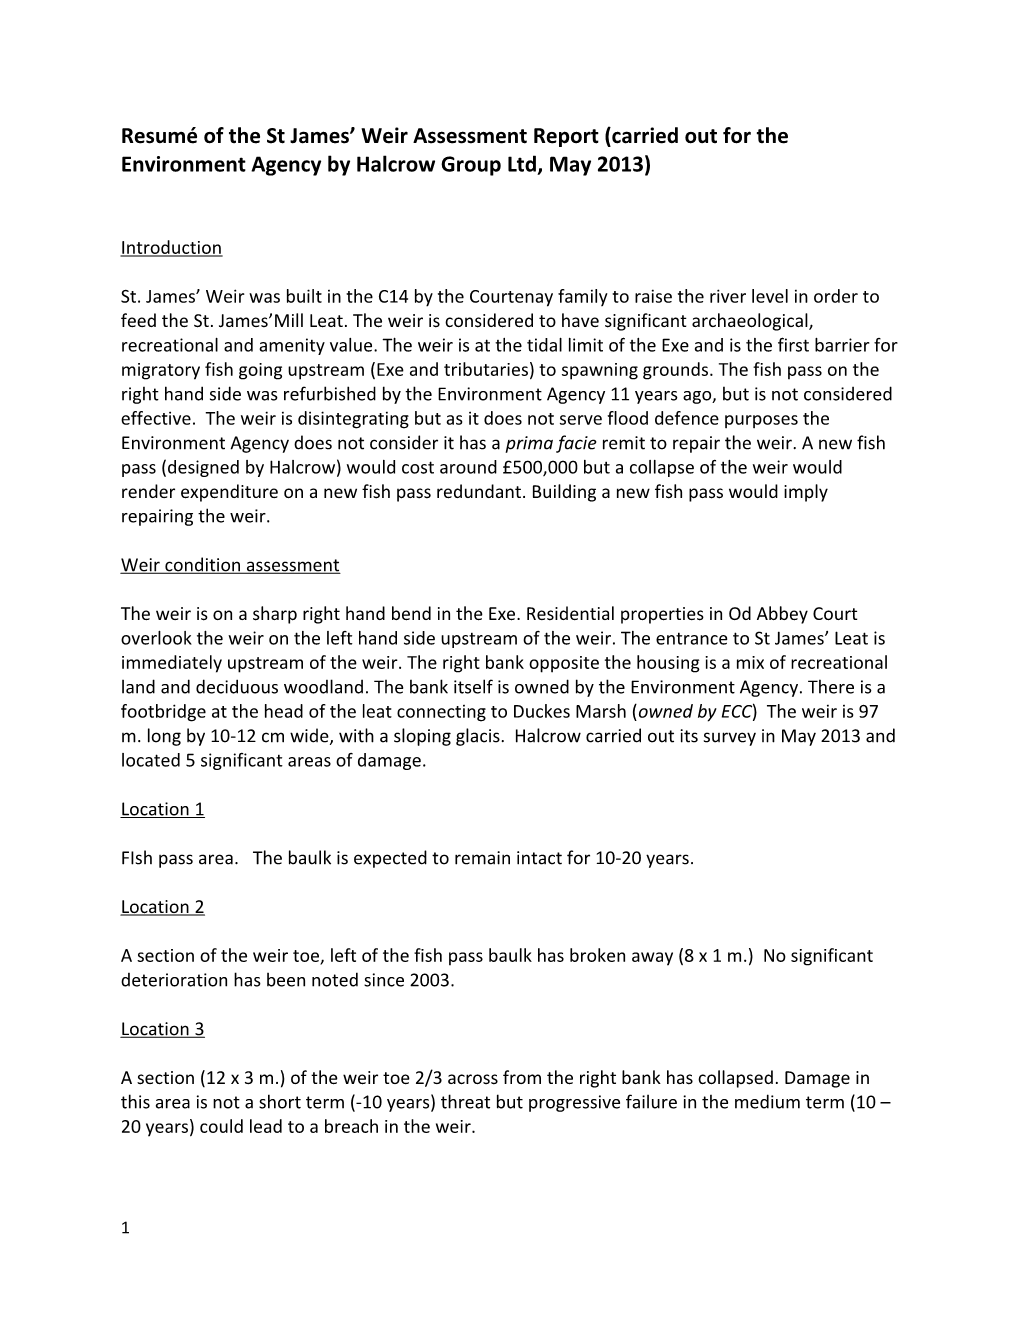 Resumé of the St James Weir Assessment Report (Carried out for the Environment Agency